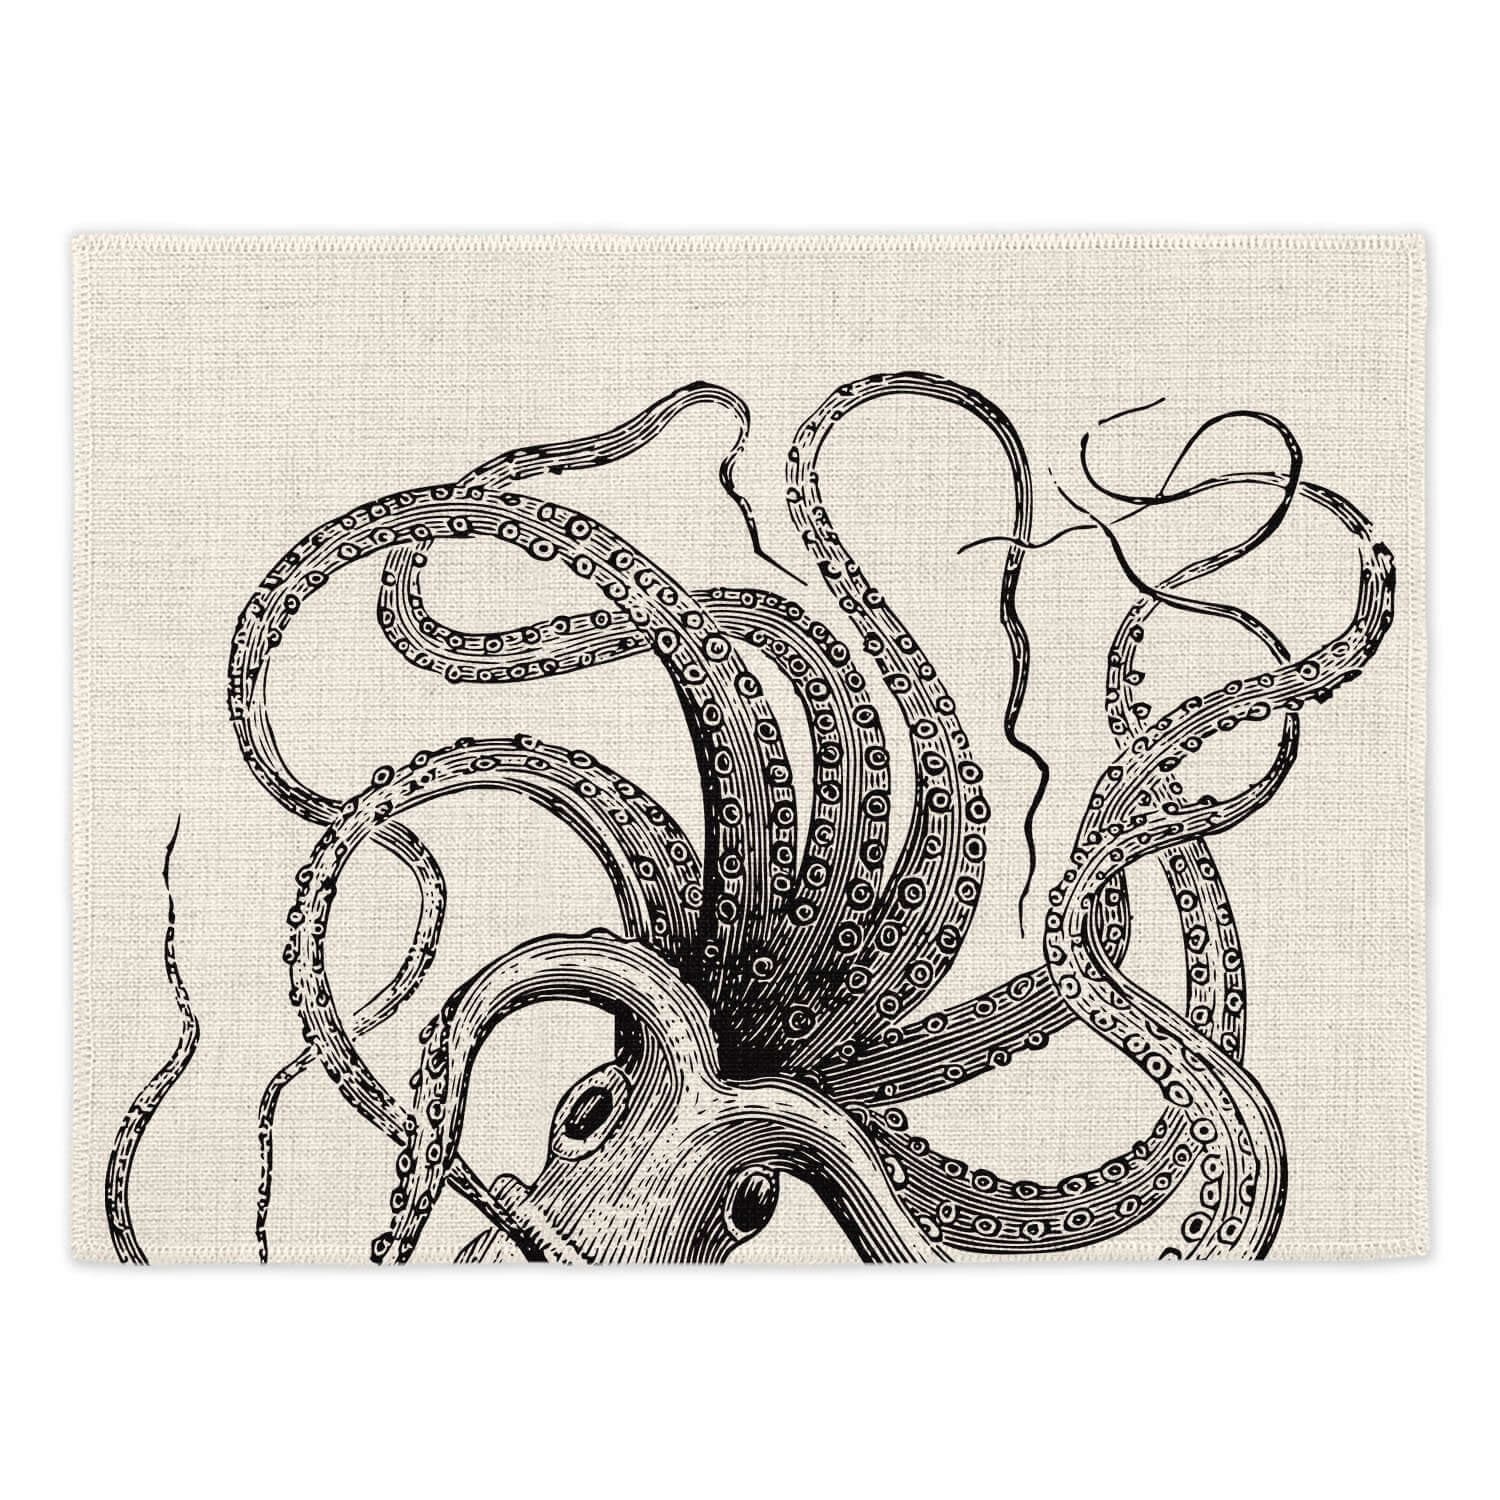 Kraken Can Can Placemats (Set of Four) Placemats Mustard and Gray Ltd Shropshire UK